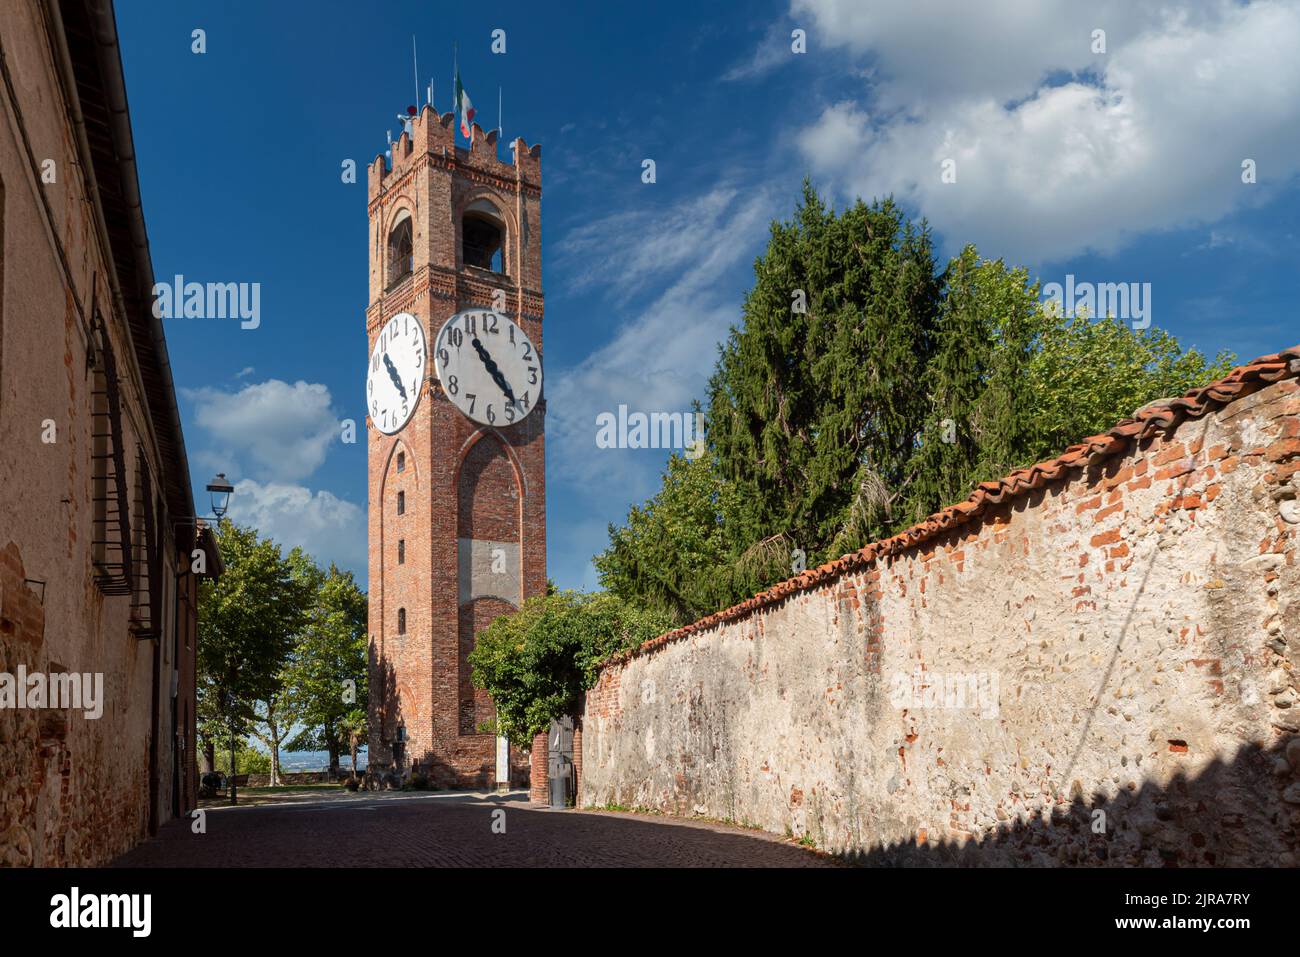 Mondovì, Cuneo, Piedmont, Italy - August 08, 2022: the Civic Tower, called 'dei Bressani' or Clock Tower, in Belvedere Gardens on blue cloudy sky Stock Photo